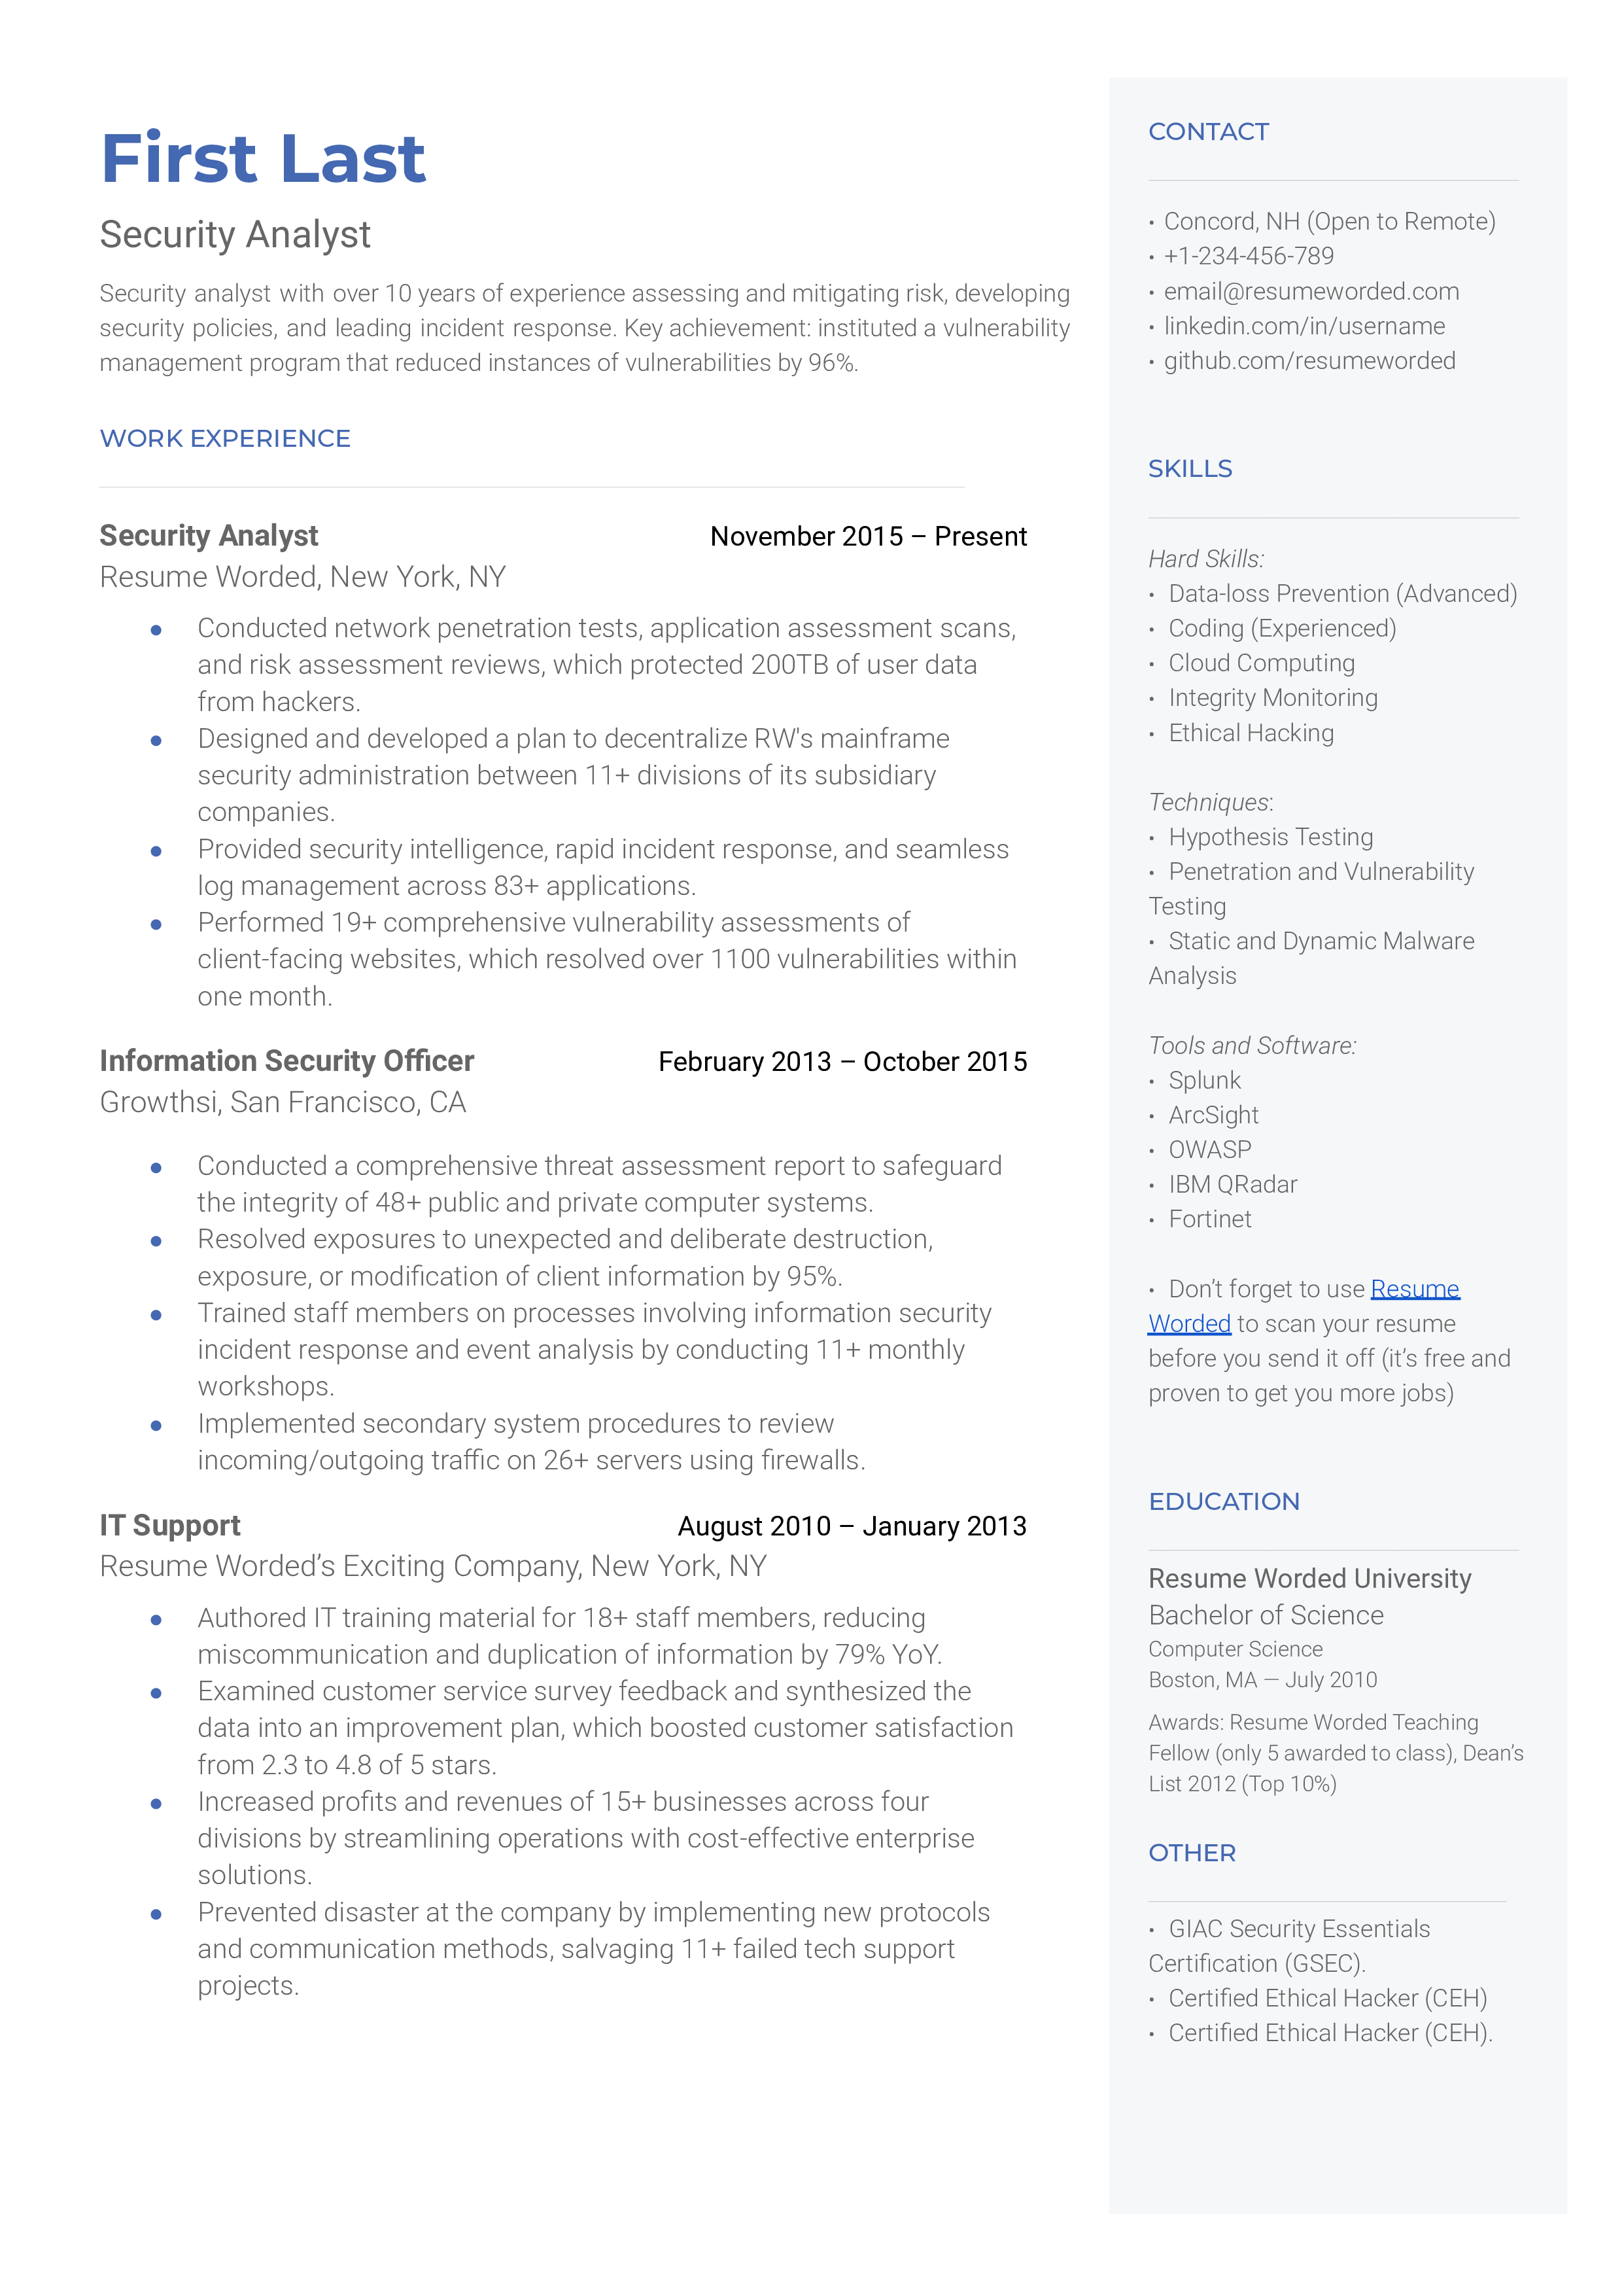 A security analyst resume template that prioritizes technical skills. 